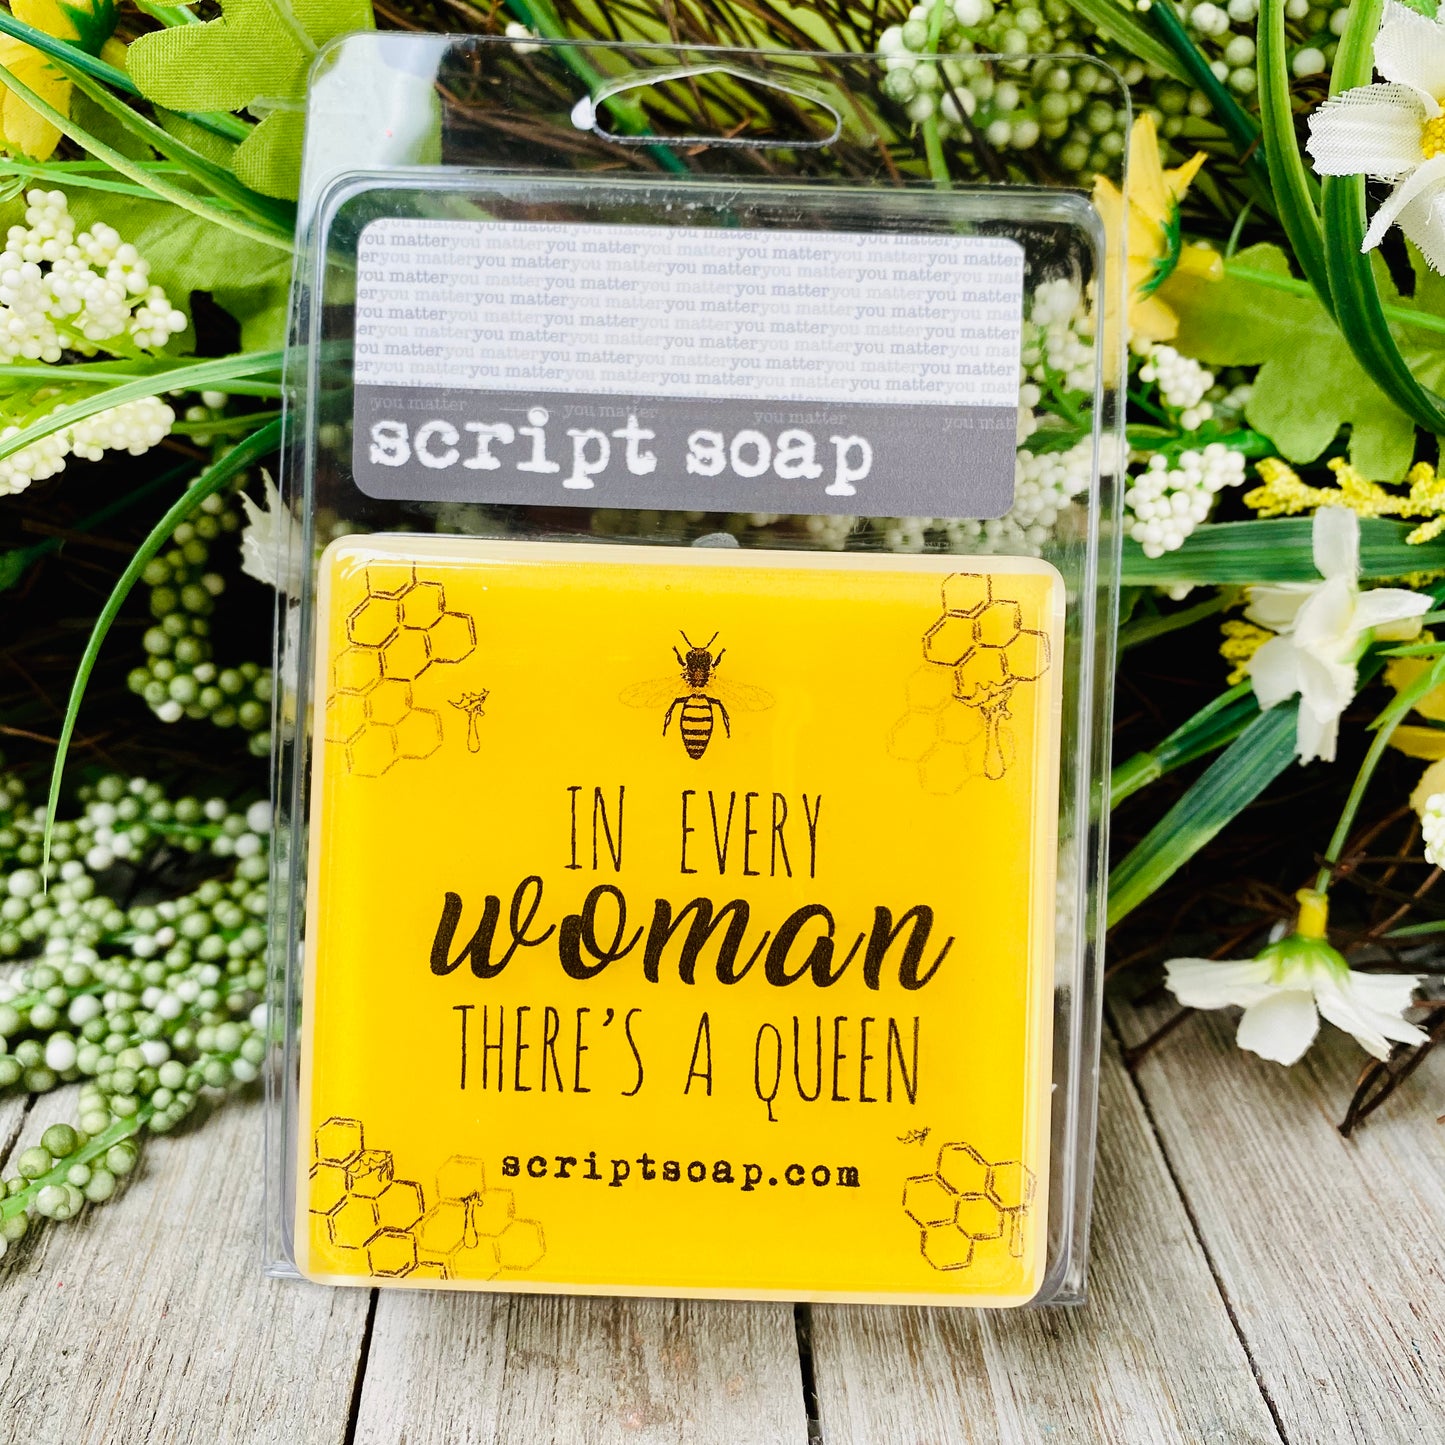 IN EVERY WOMAN THERE'S A QUEEN Script Soap